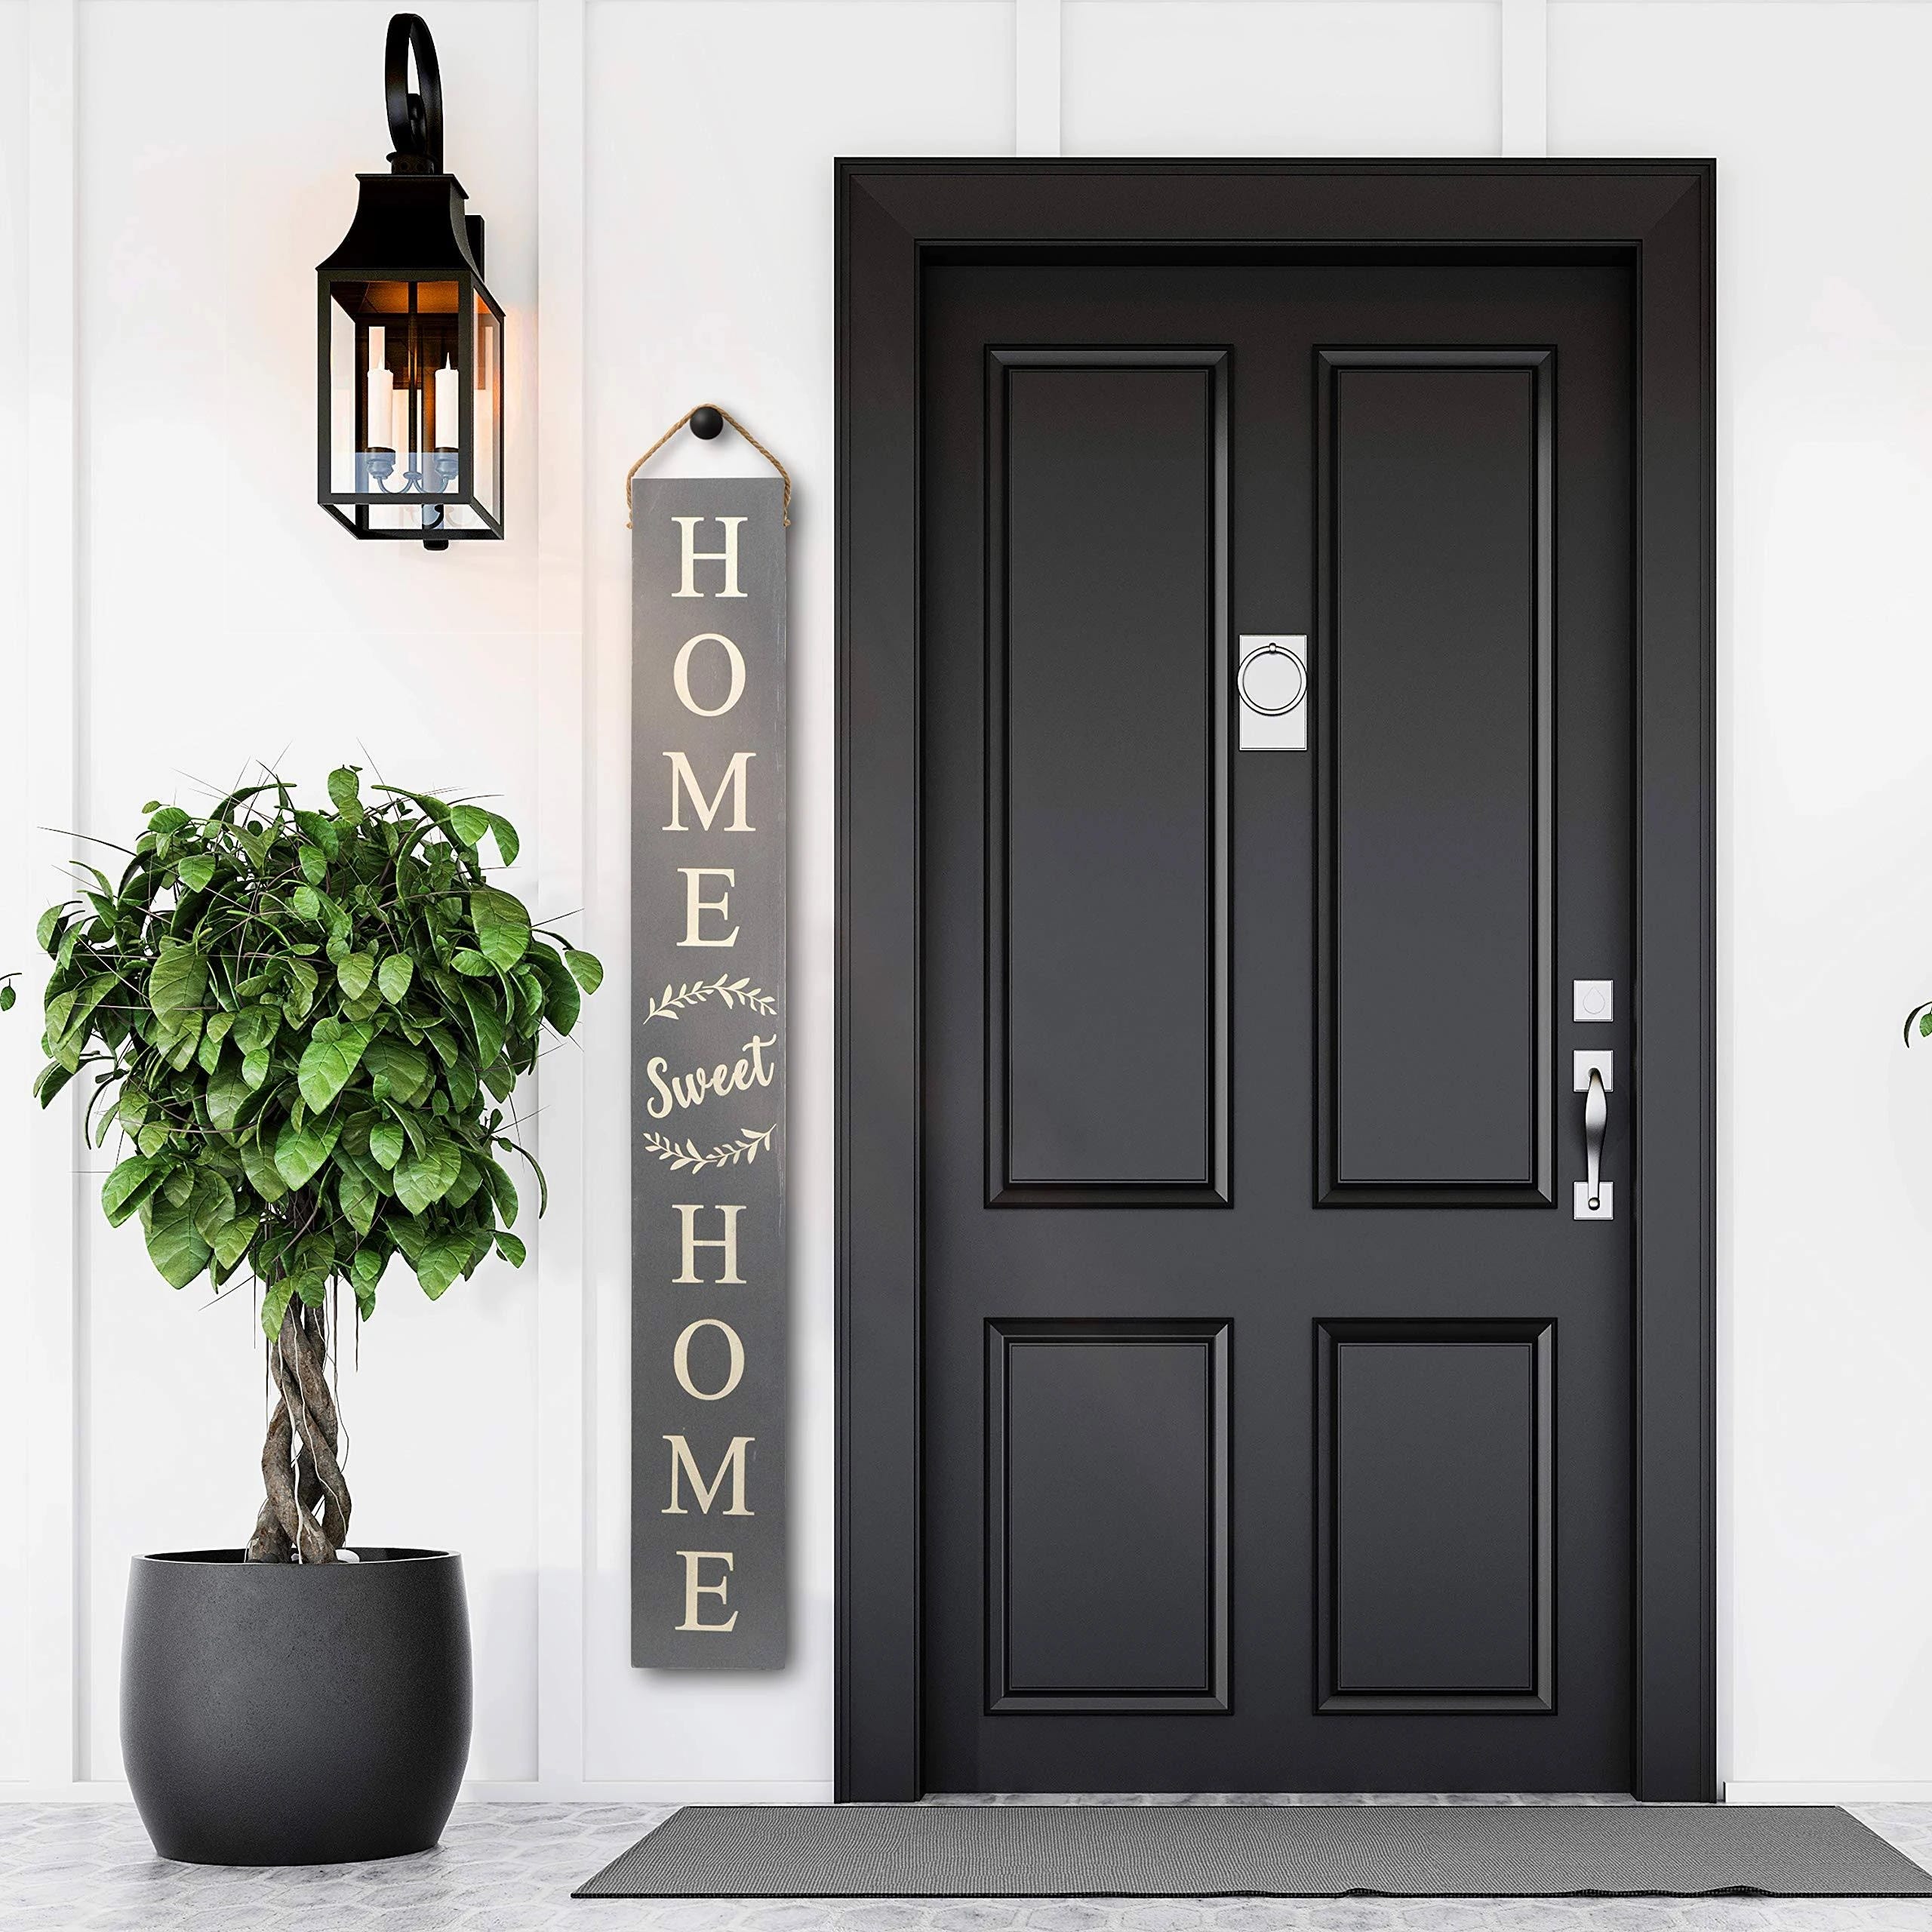 MAINEVENT 5 ft Tall Outdoor Front Door Welcome Sign for Farmhouses | Image